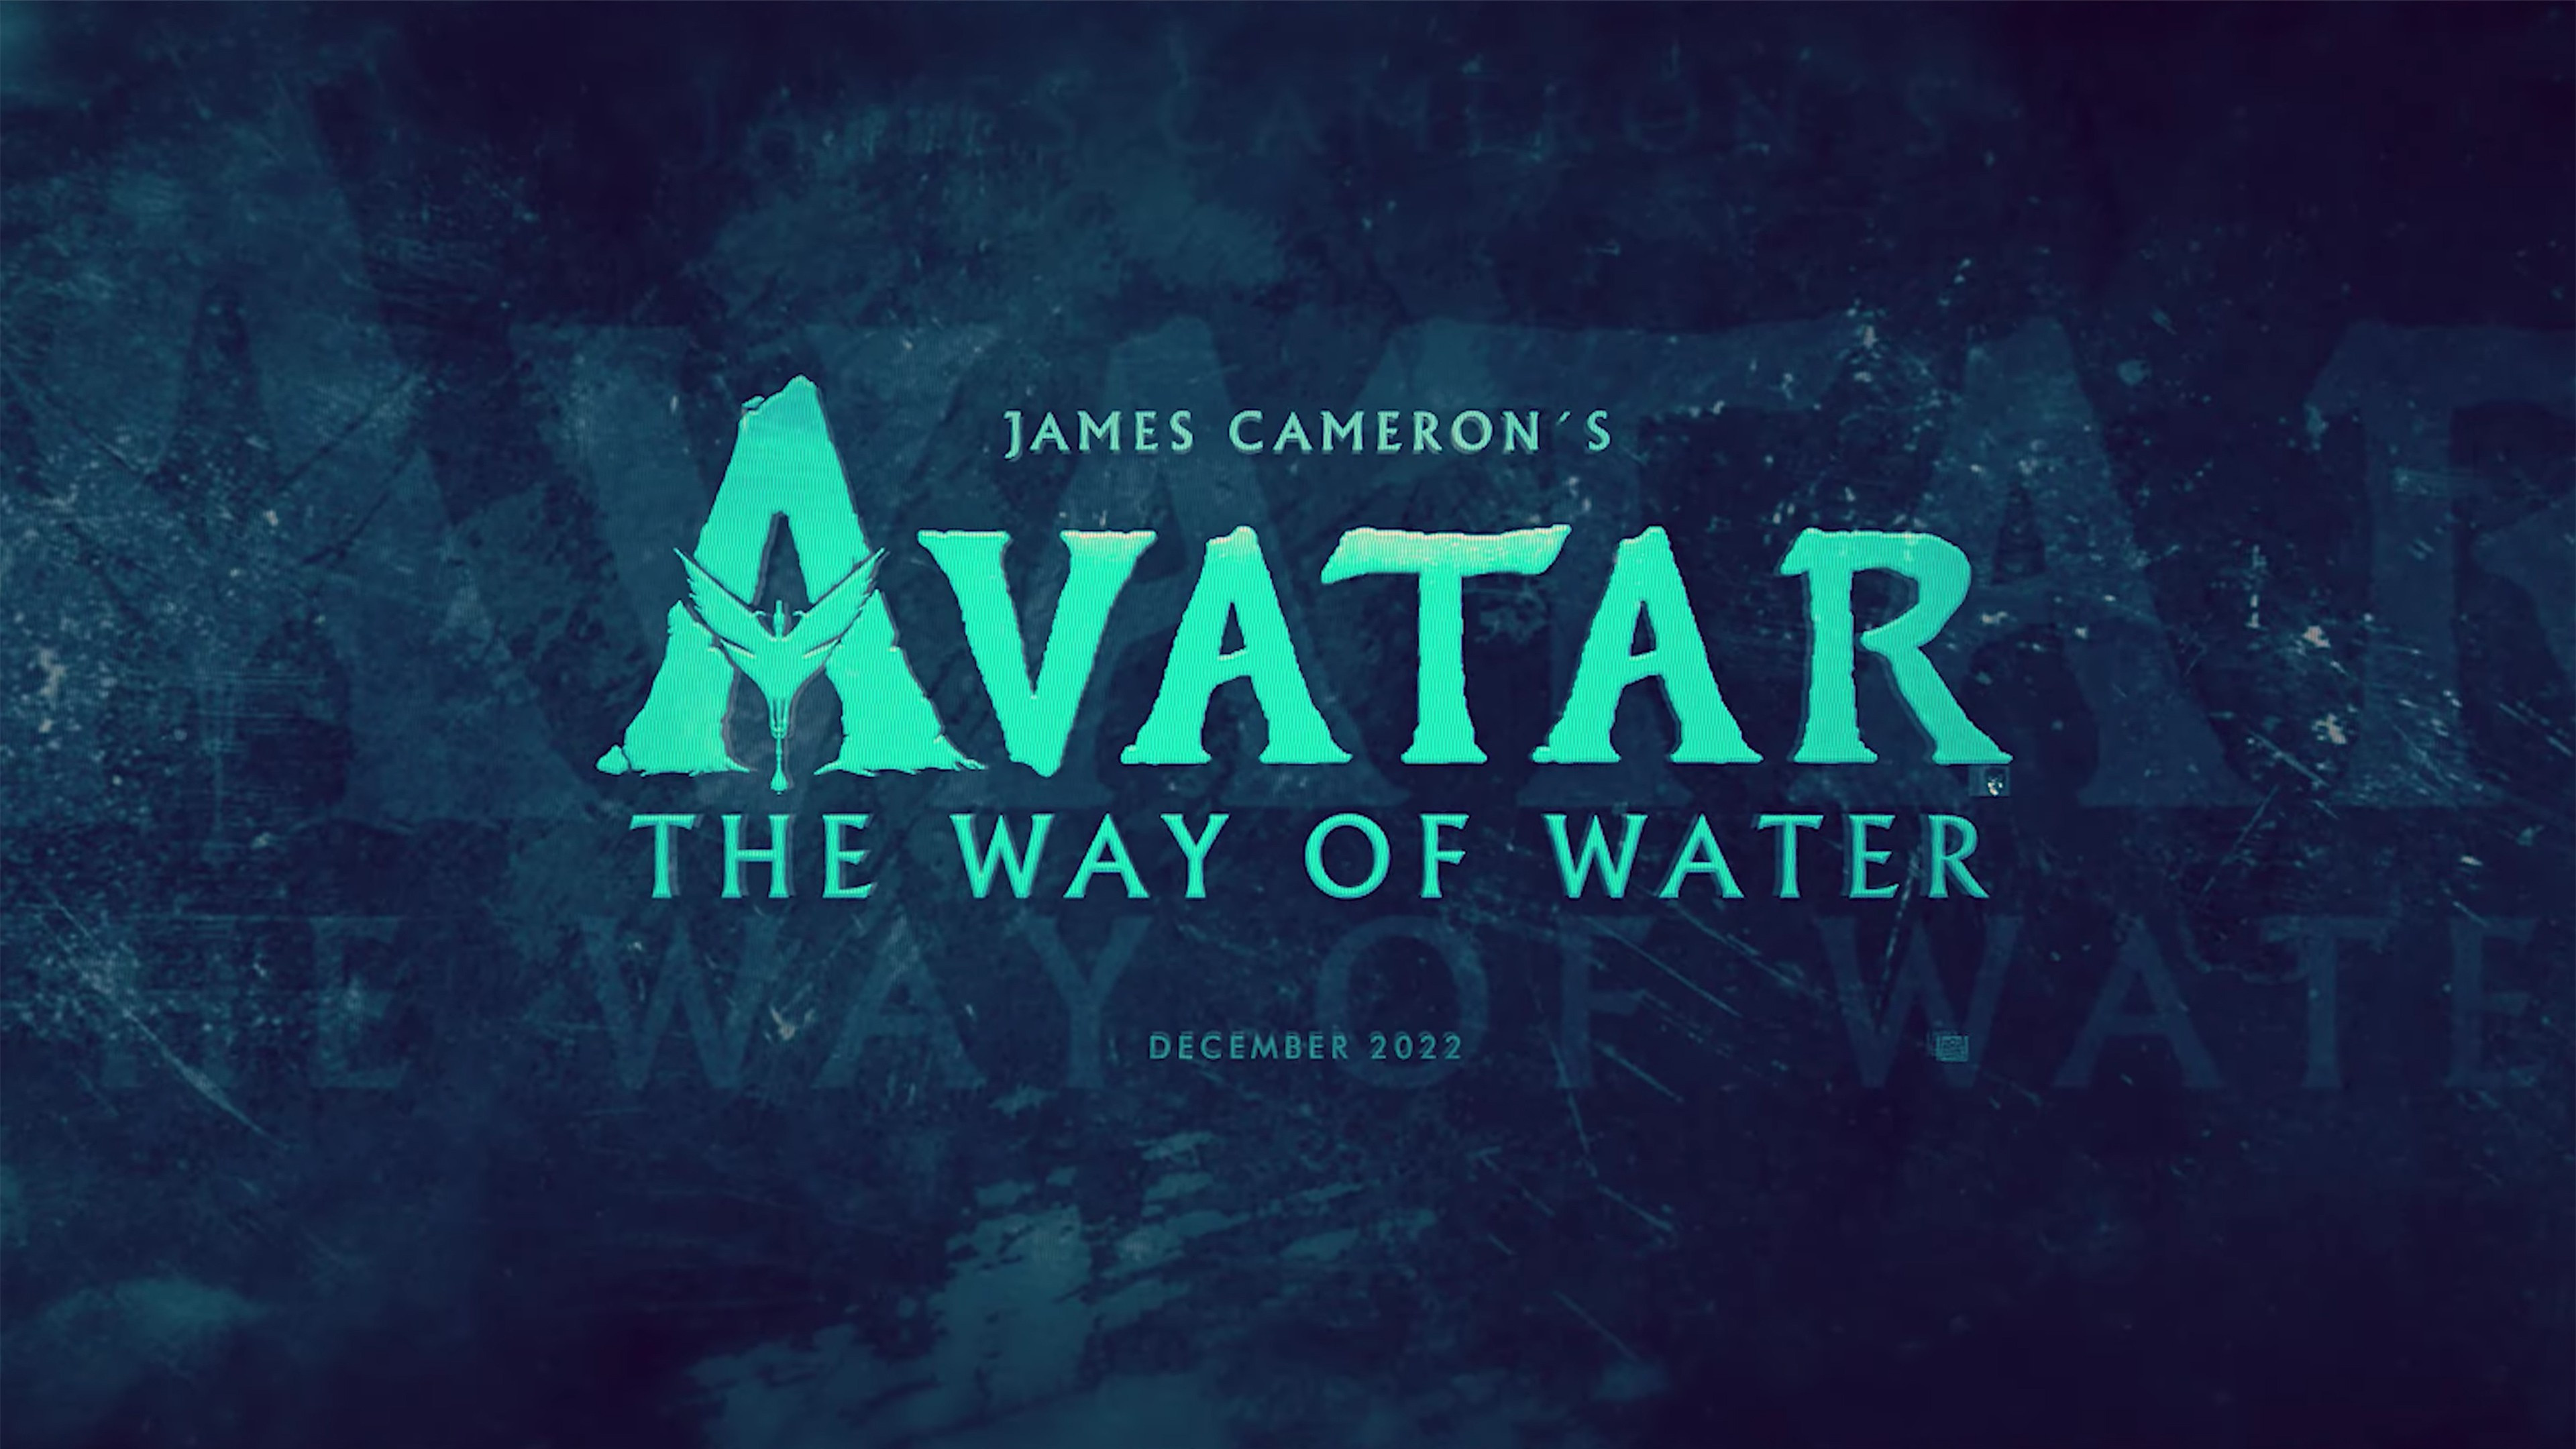 Download wallpaper: Avatar 2 The Way of Water 3840x2160